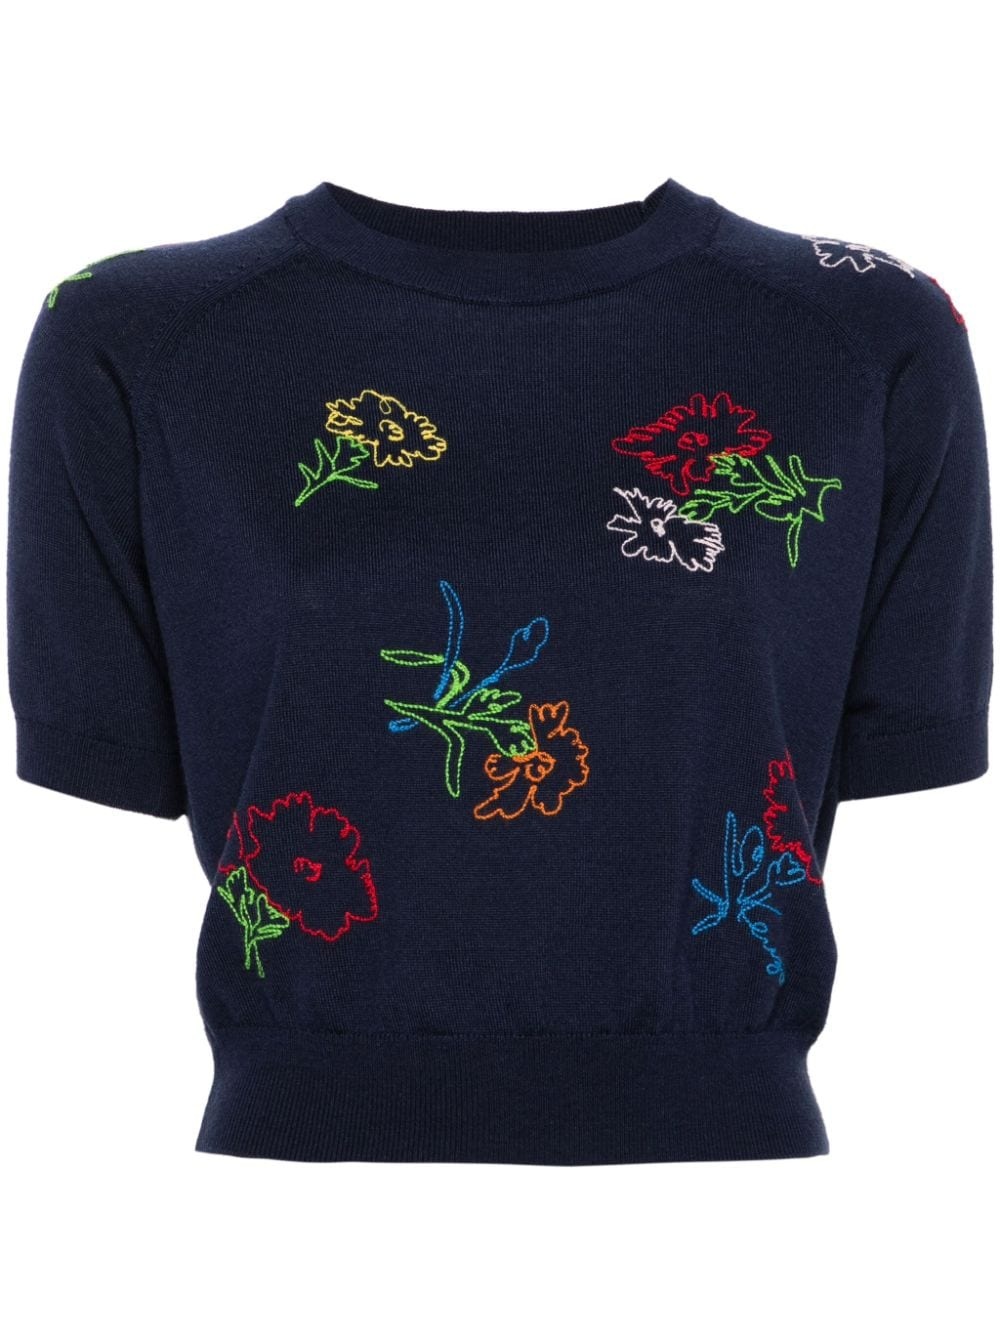 Drawn Flowers-embroidered jumper - 1